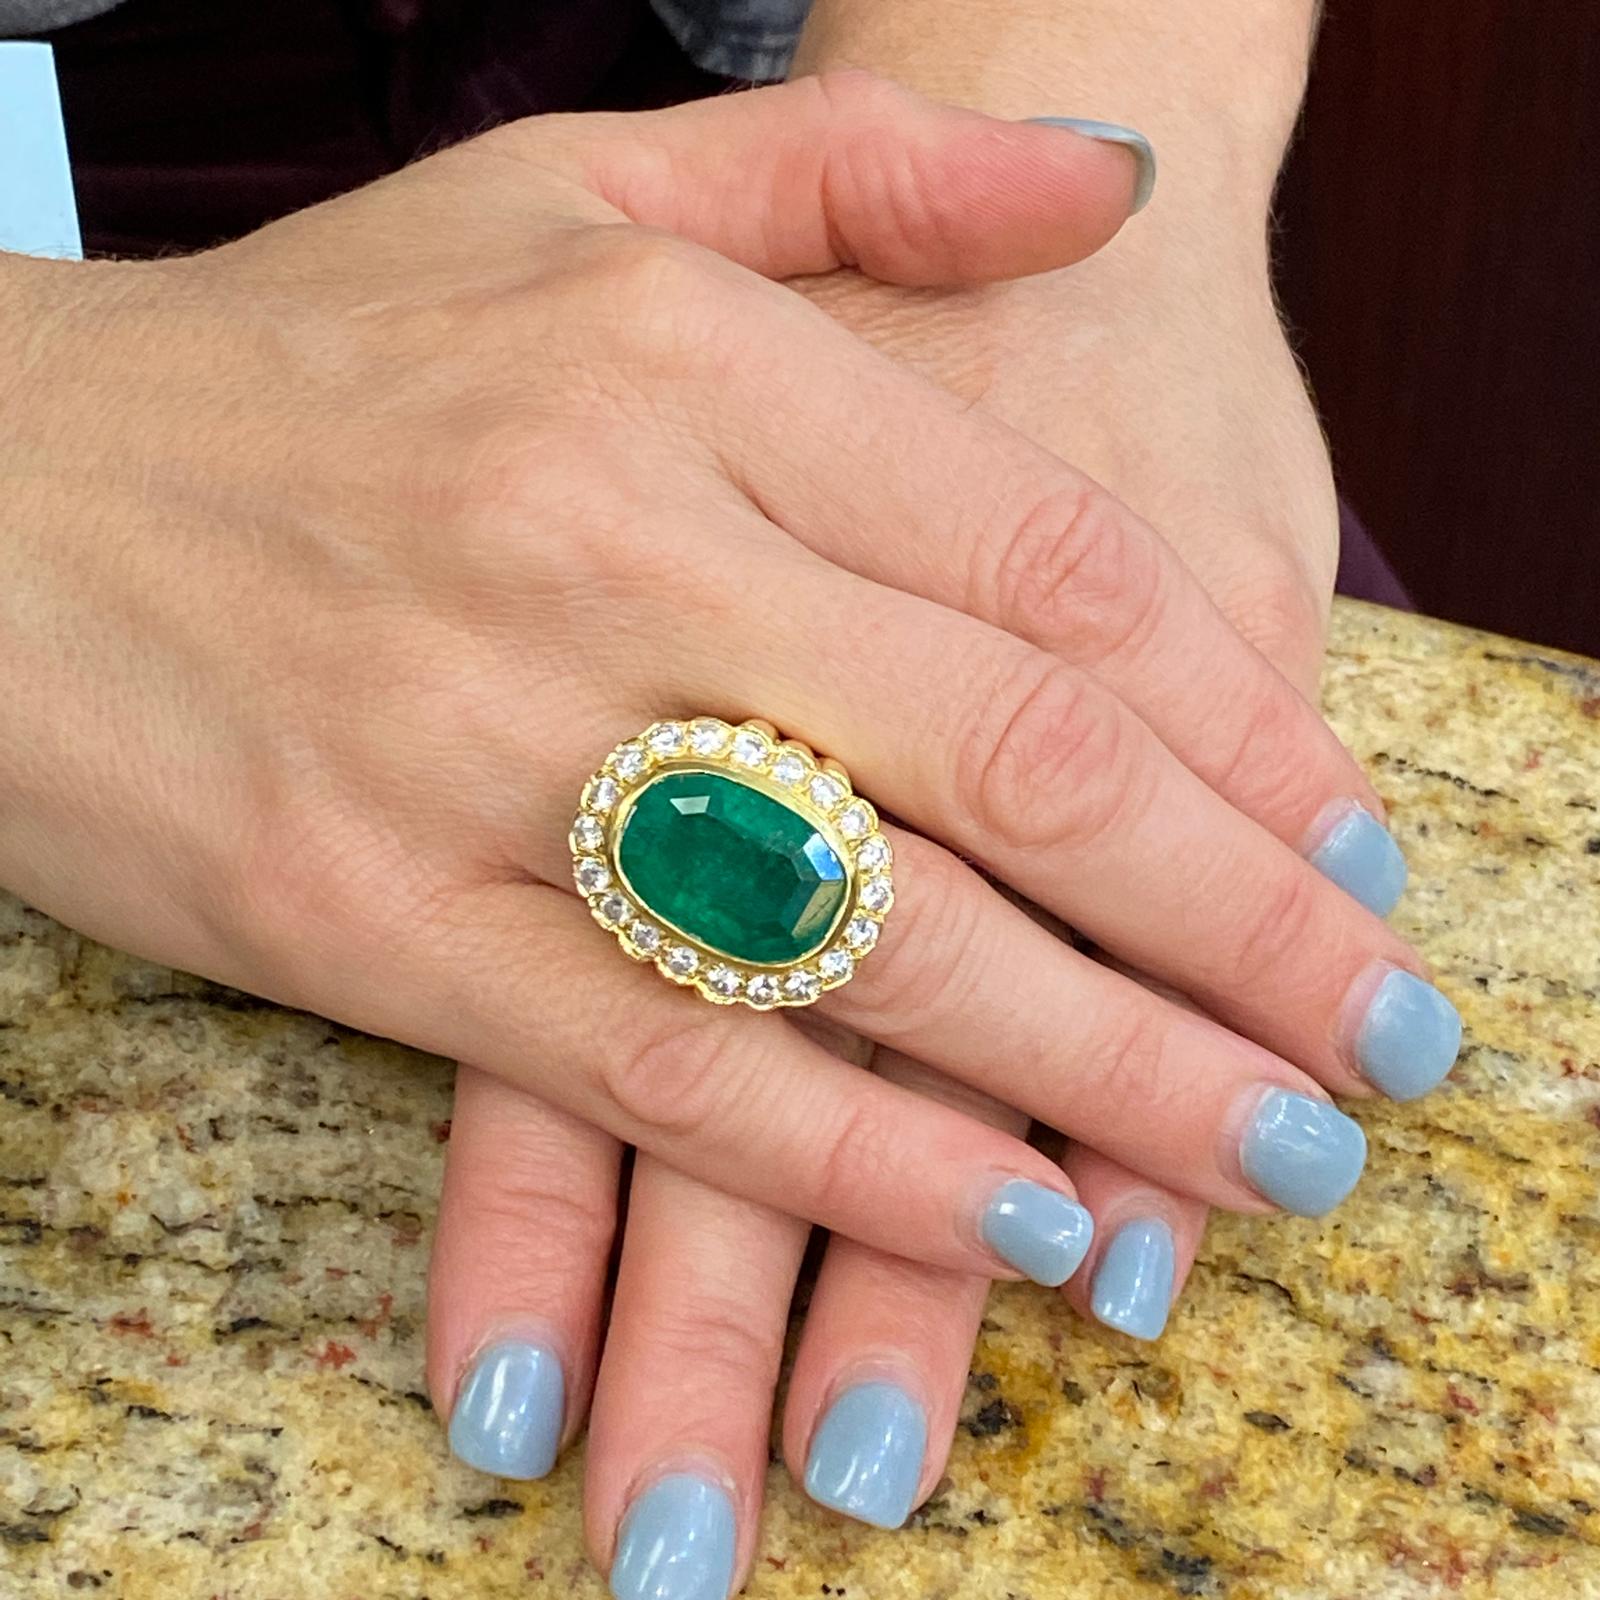 Stunning Colombian Emerald Diamond Cocktail Ring hand crafted in 18 karat yellow gold. The 11.00 carat oval cut Colombian emerald has a deep green color and is certified by the AGL. The emerald is surrounded by 20 round brilliant cut diamonds